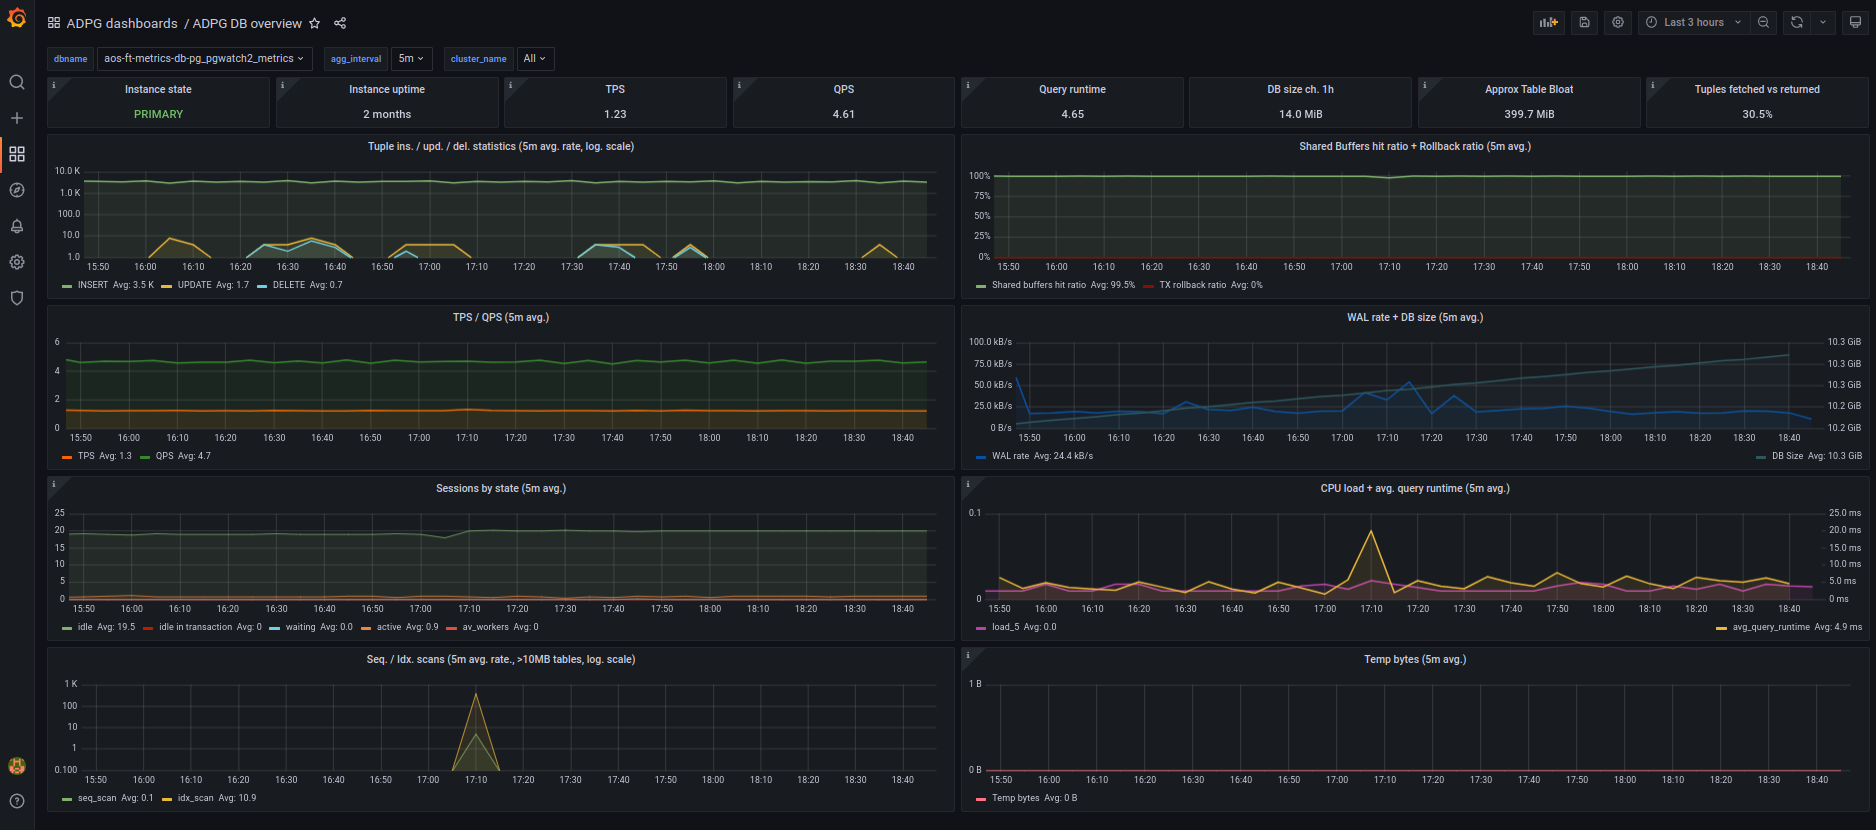 ADPG DB overview dashboard